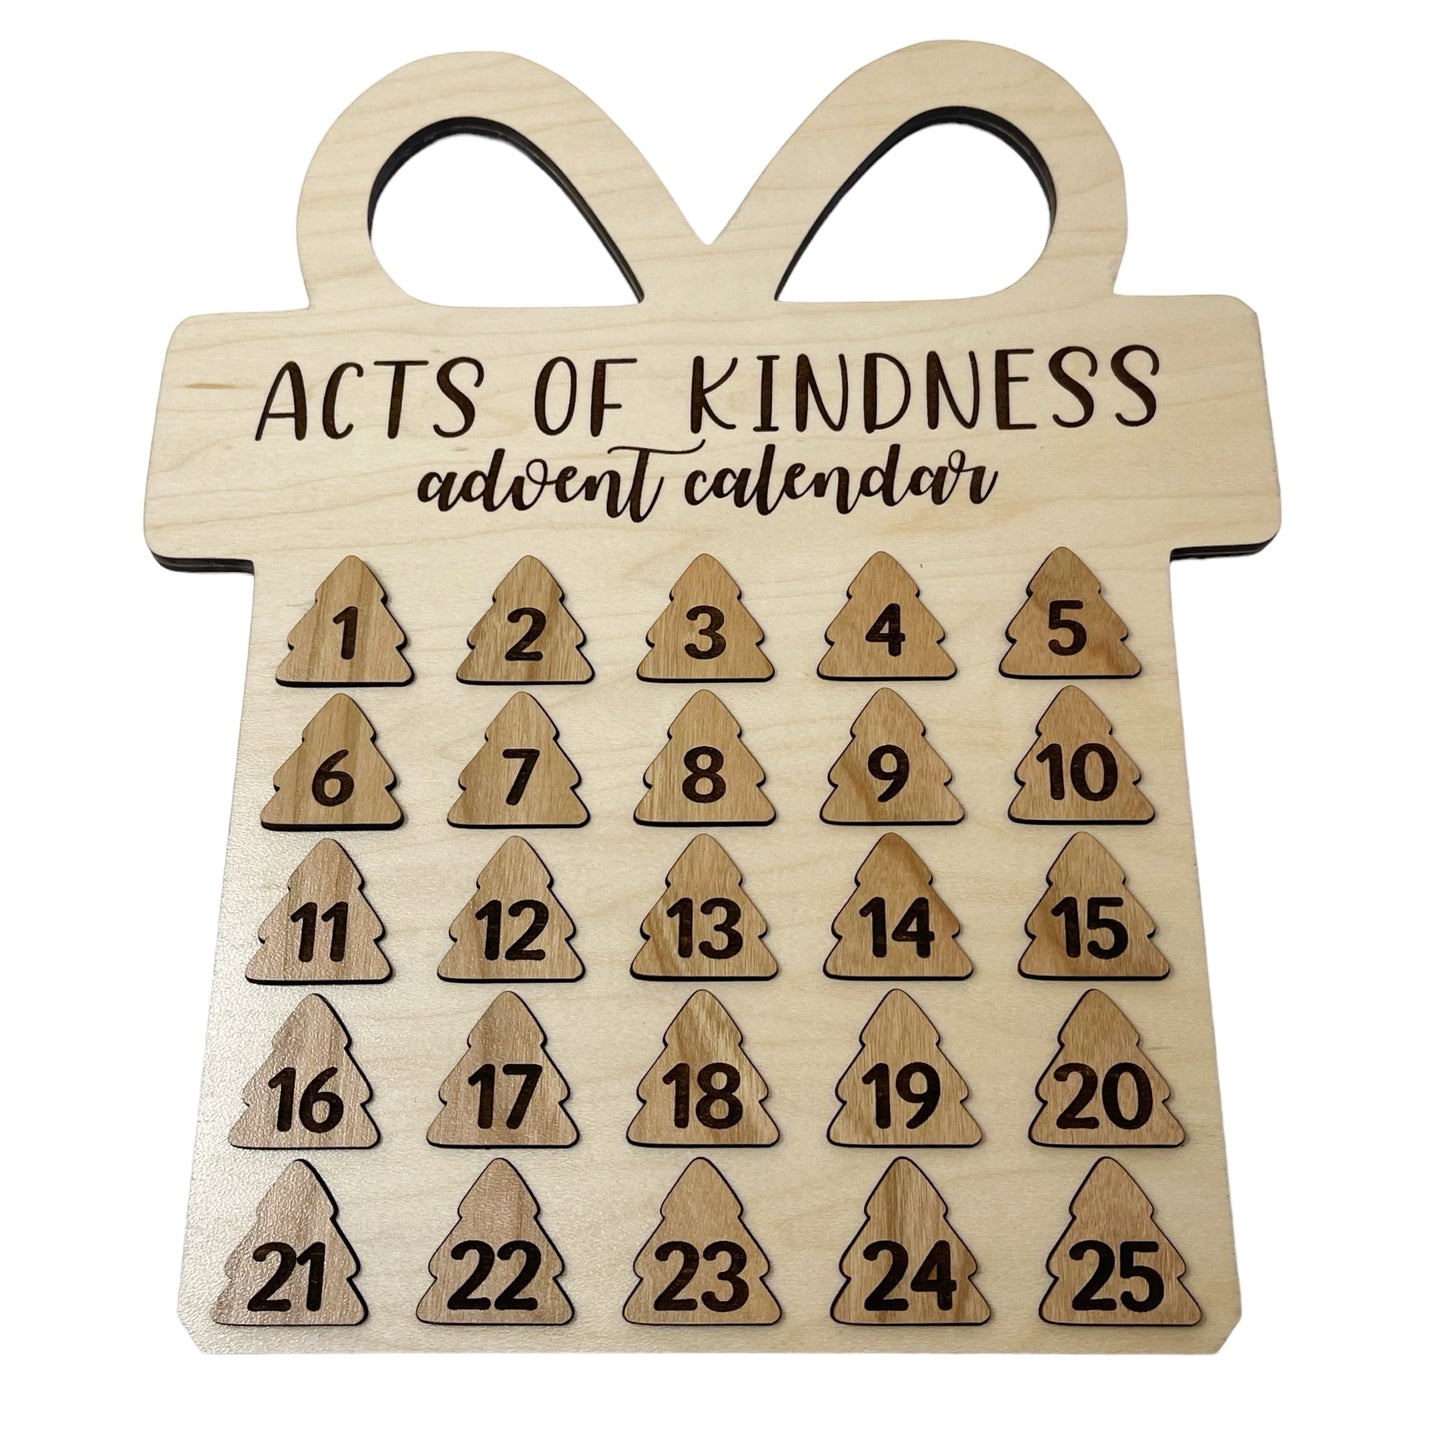 Christmas Advent Calendars - Acts of Kindness Countdown Calendar, Christmas Activities for Families, Activity Calendar, Kids Advent Calendar